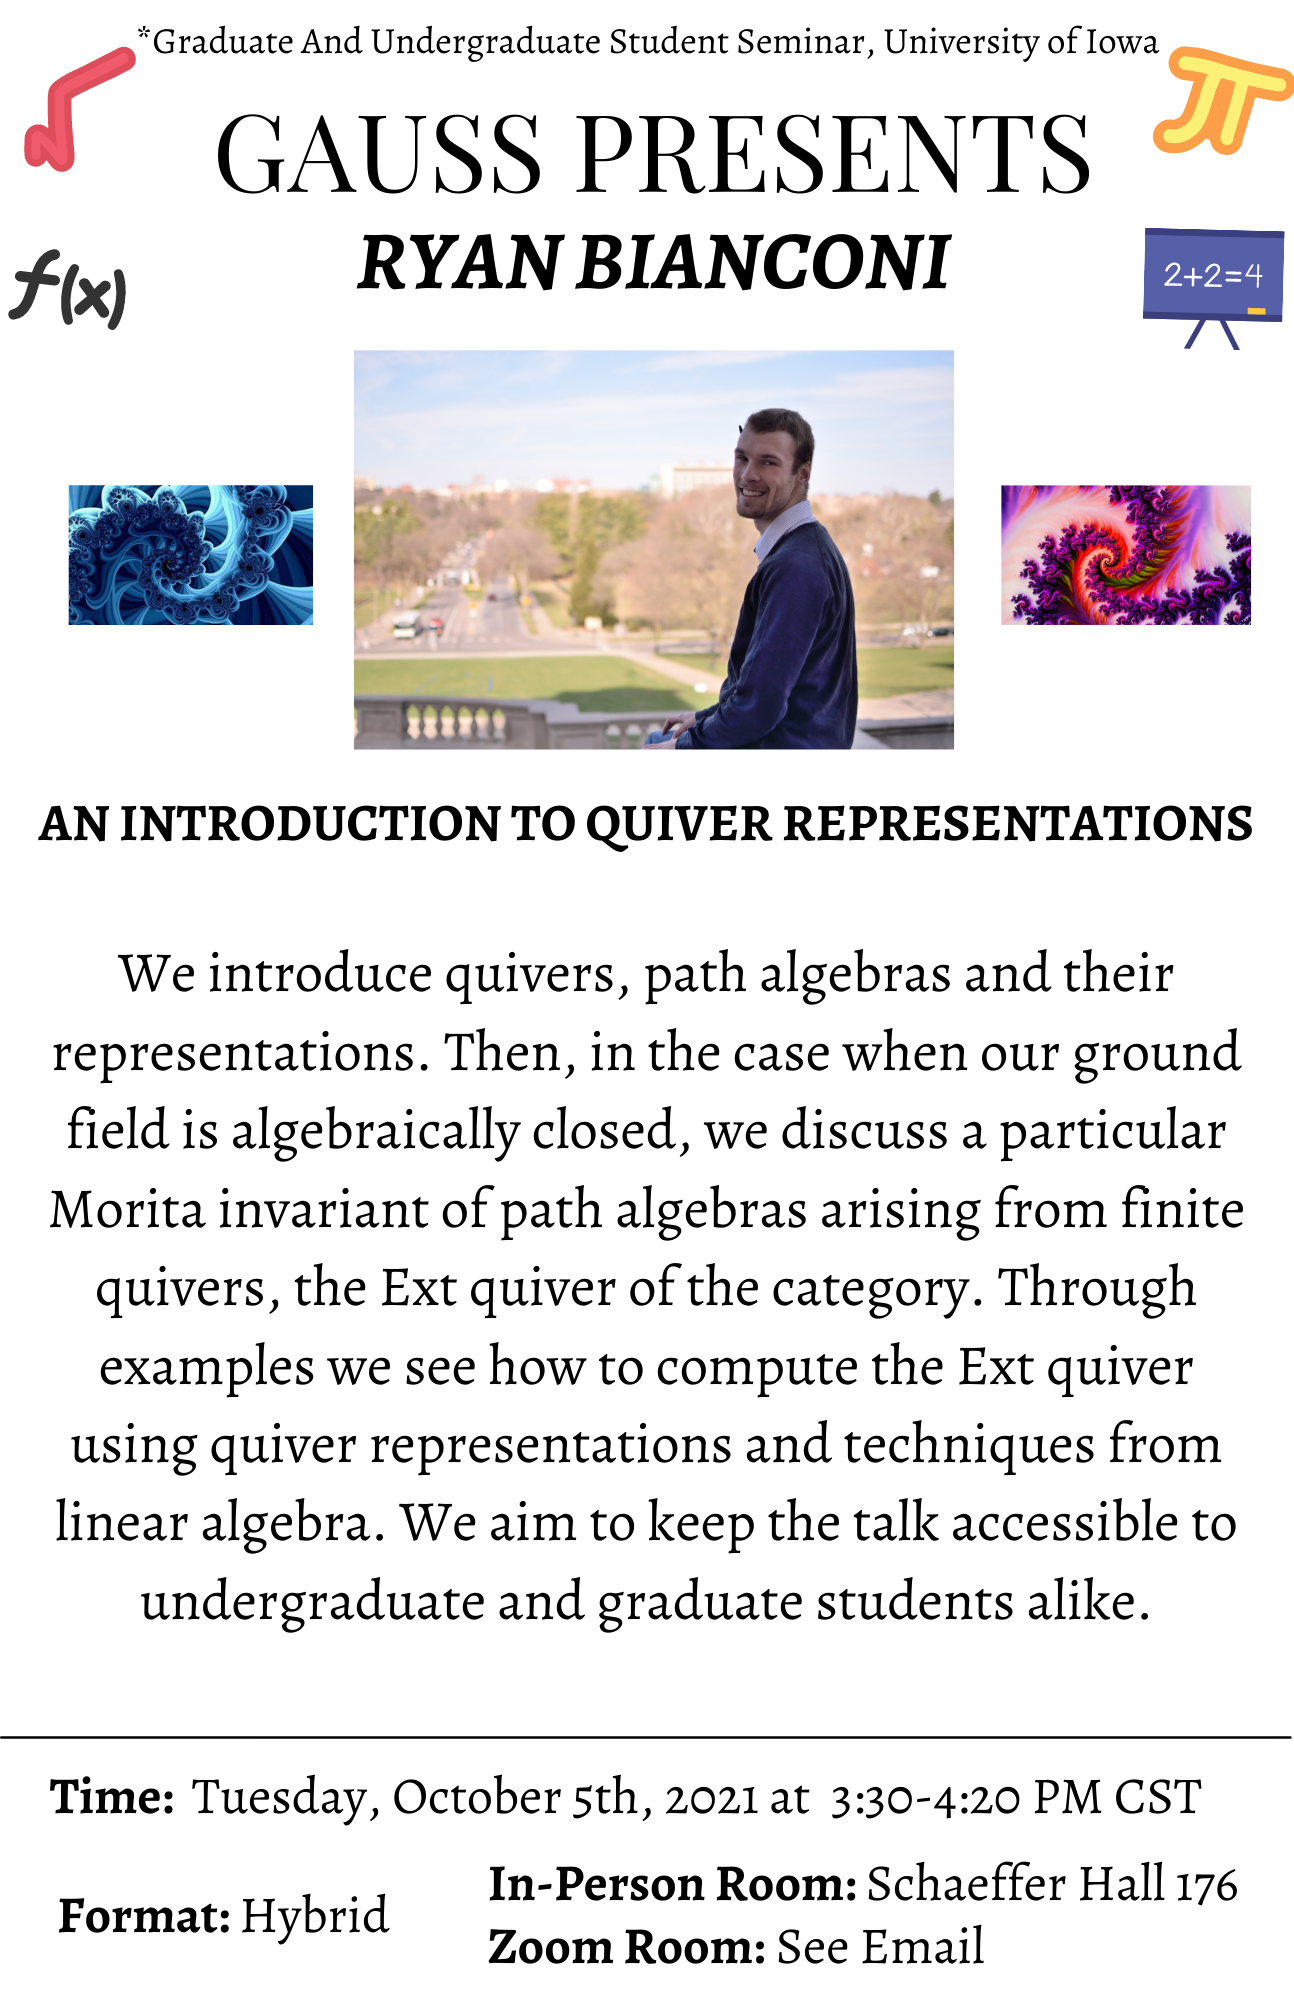 We introduce quivers, path algebras and their representations. Then, in the case when our ground field is algebraically closed, we discuss a particular Morita invariant of path algebras arising from finite quivers, the Ext quiver of the category. Through 